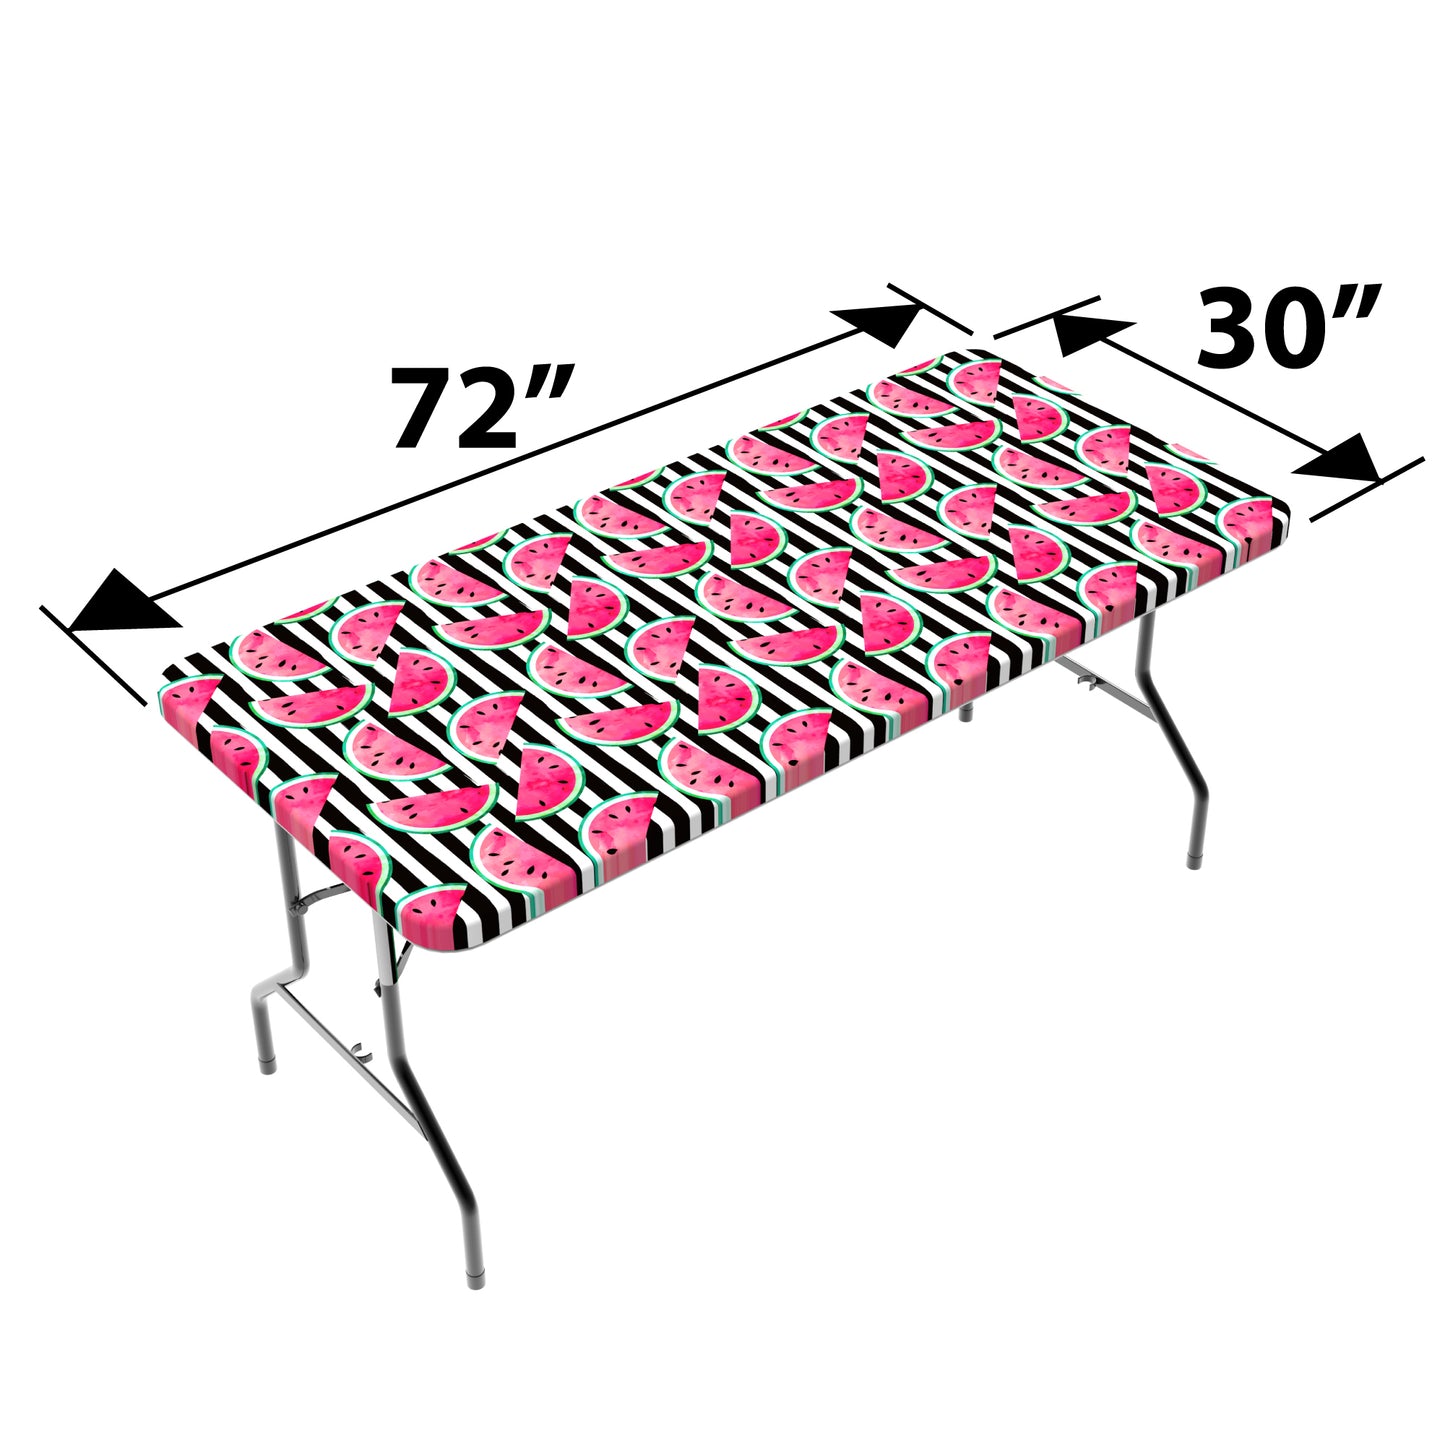 TableCloth PLUS 72" Watermelon Fitted PEVA Vinyl Tablecloth for 6' Folding Tables displayed adorning a folding table